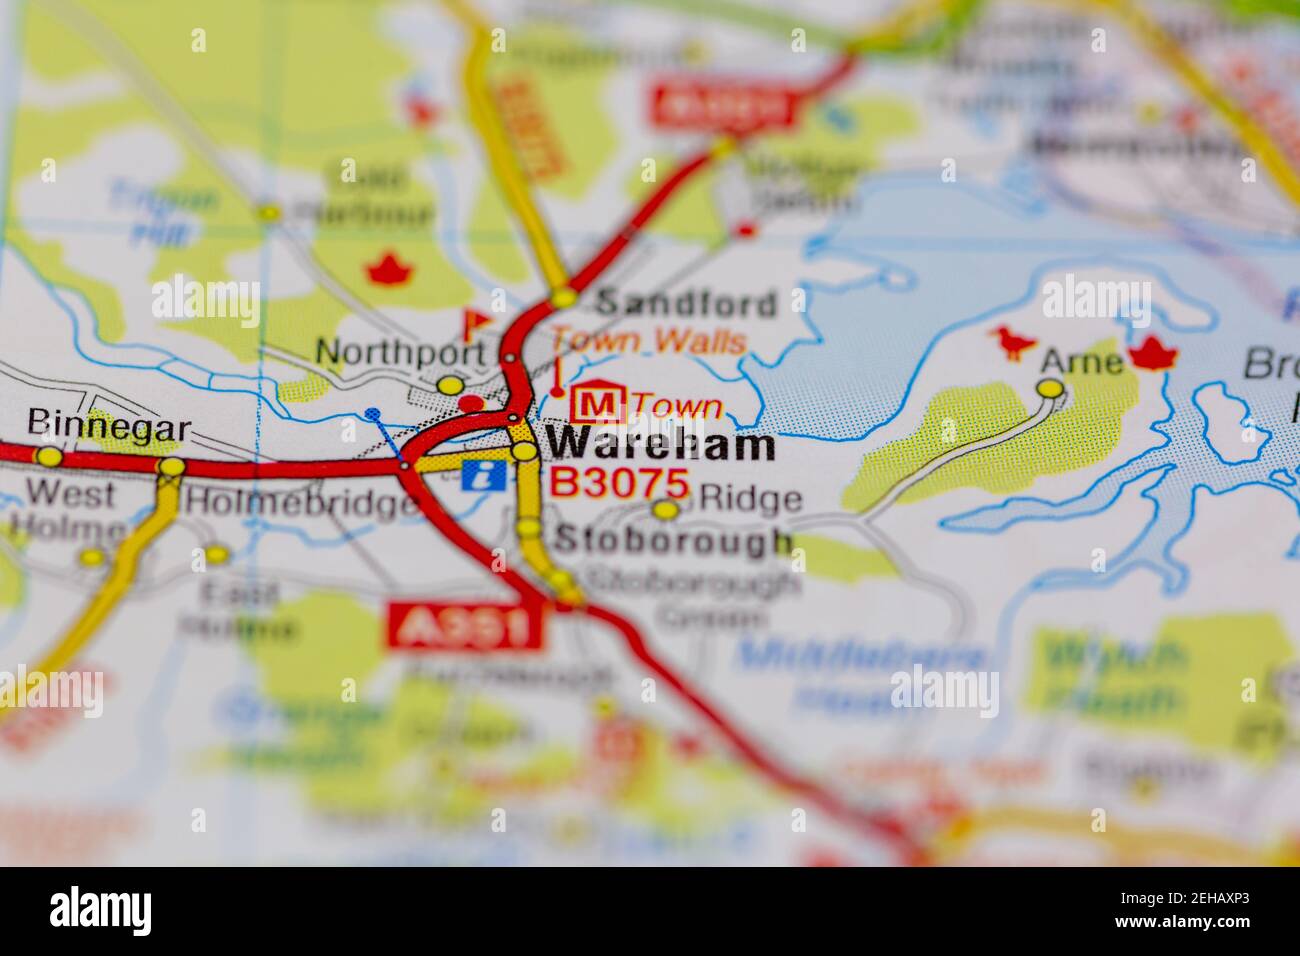 Wareham And Surrounding Areas Shown On A Road Map Or Geography Map 2EHAXP3 